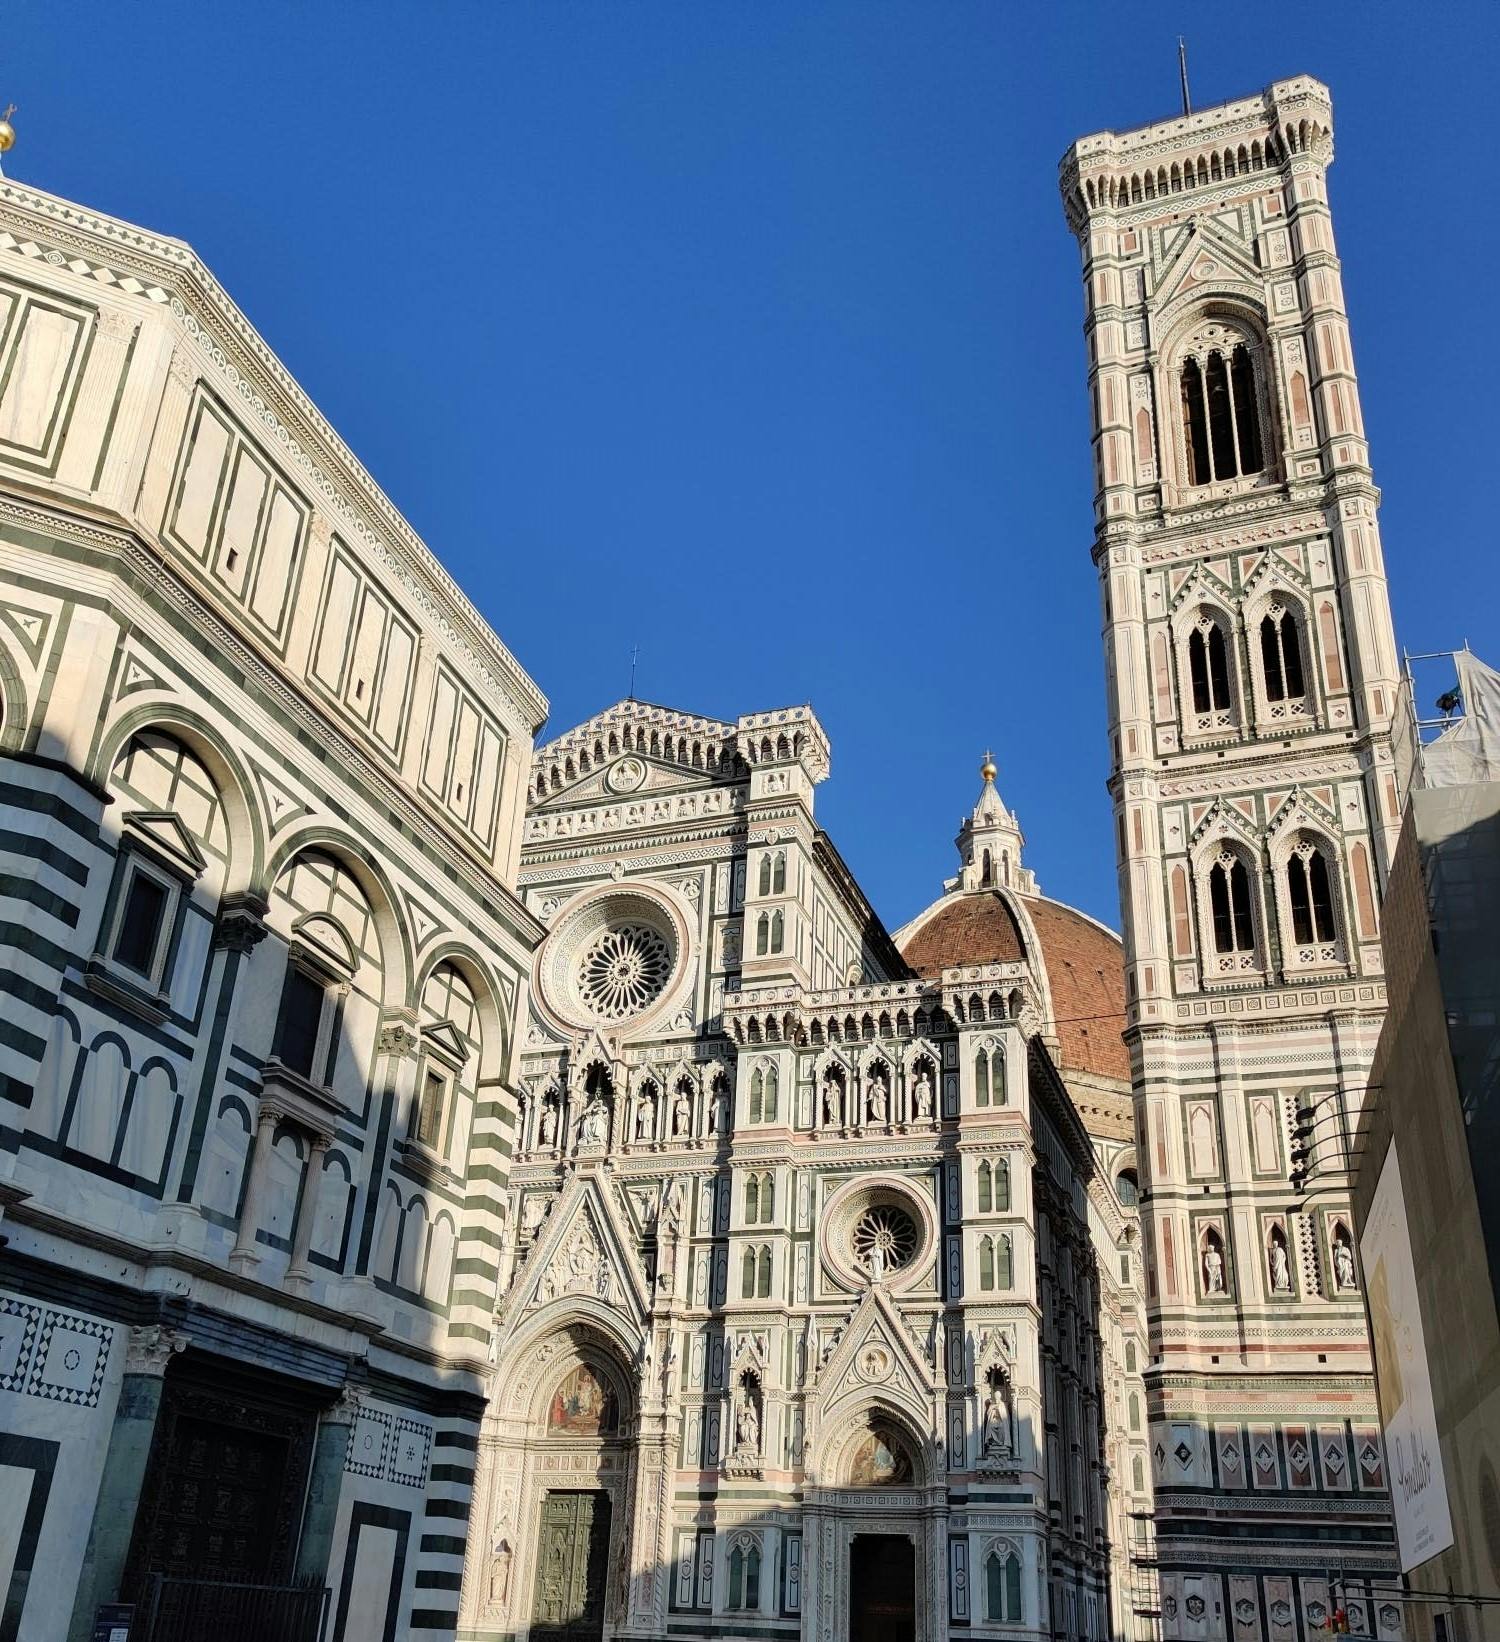 Guided walking tour of Florence with Accademia Gallery